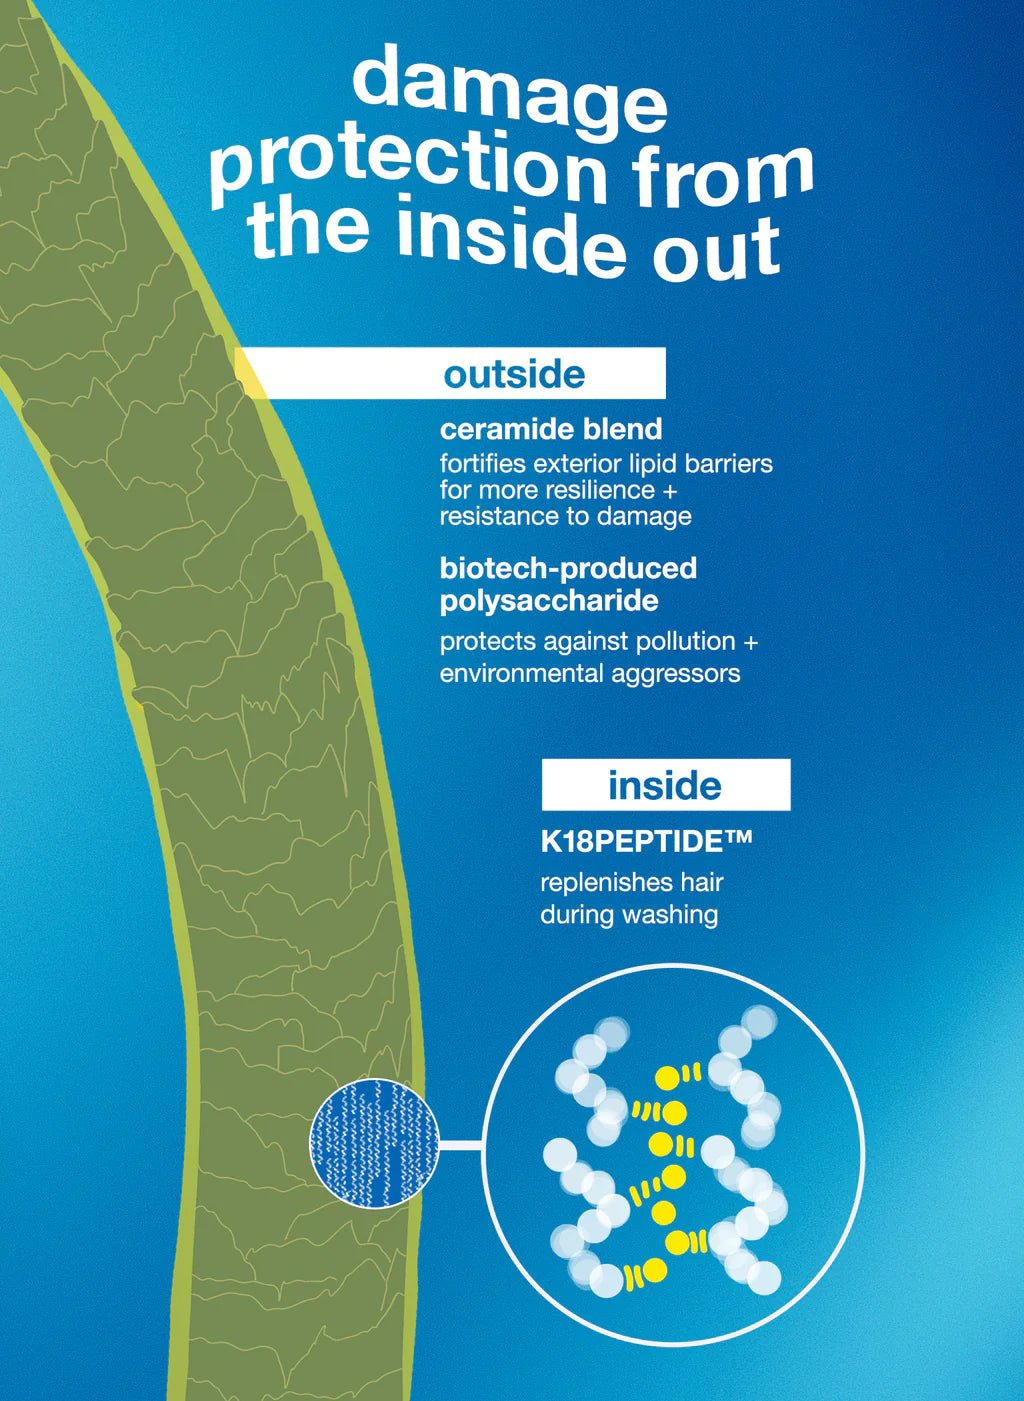 Diagram showing hair protection. "Outside": Ceramide blend fortifies lipid barriers, and biotech-produced polysaccharide protects against pollution for ultimate damage protection. "Inside": K18Peptide™ replenishes hair during washing, making K18 Damage Shield pH Protective Conditioner by K18 Hair Repair part of a nourishing conditioner routine that boosts hair health.